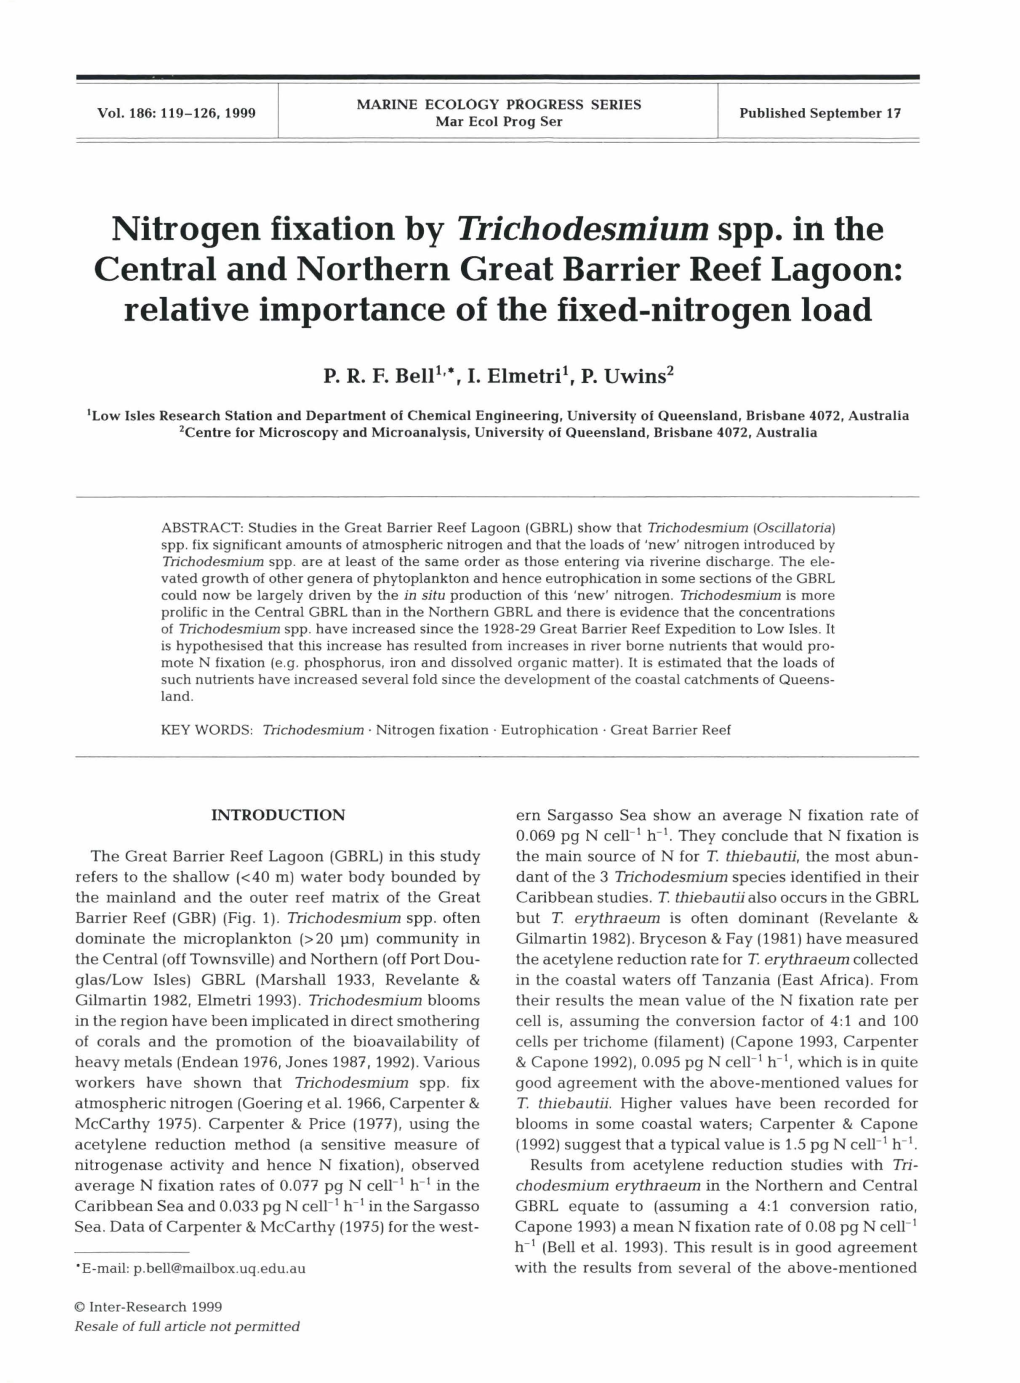 Nitrogen Fixation by Trichodesmium Spp. in the Central and Northern Great Barrier Reef Lagoon: Relative Importance of the Fixed-Nitrogen Load